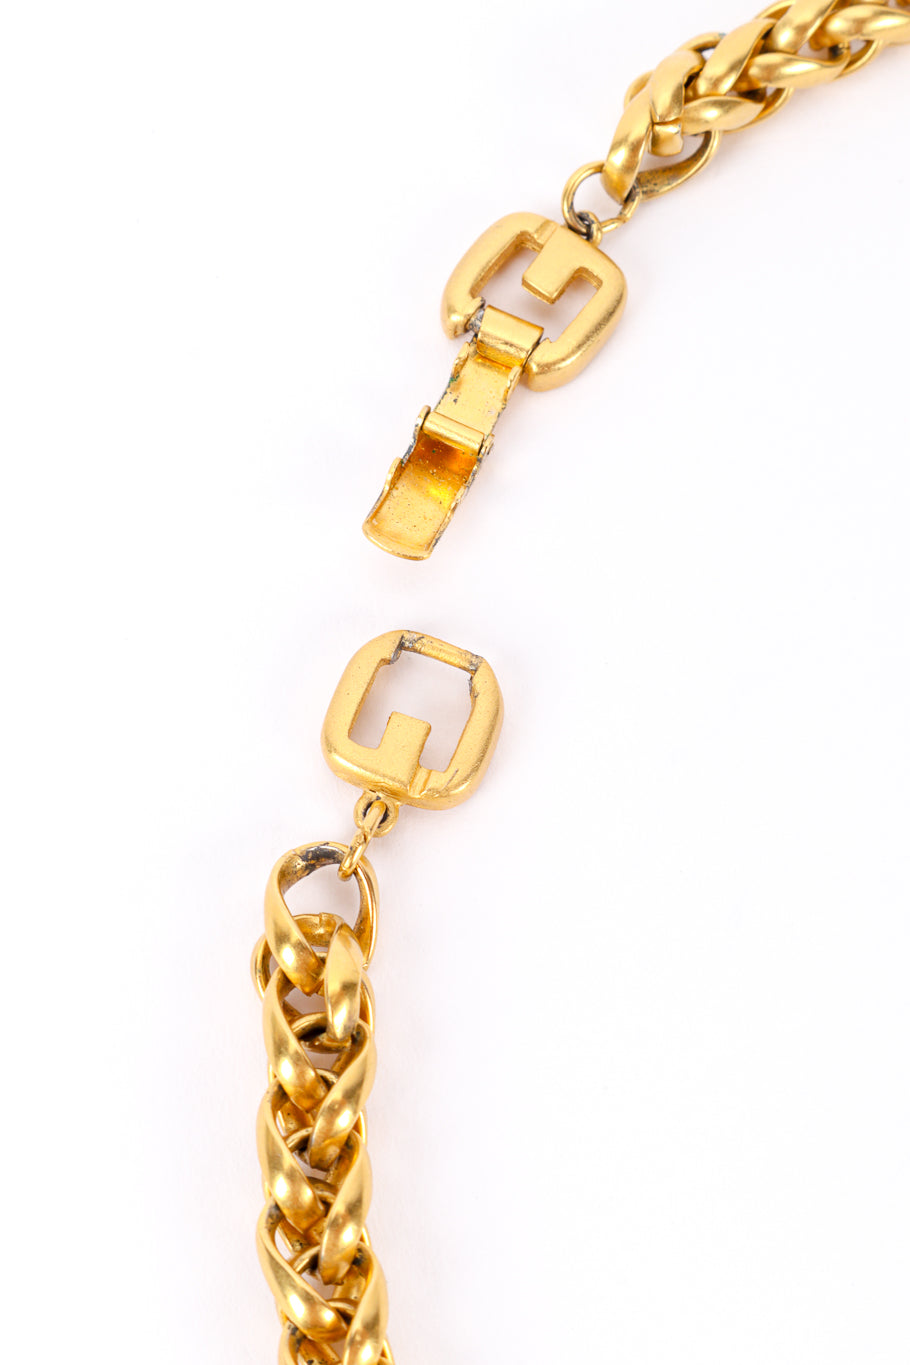 Vintage Givenchy Wheat Chain Necklace closure unclasped @recessla